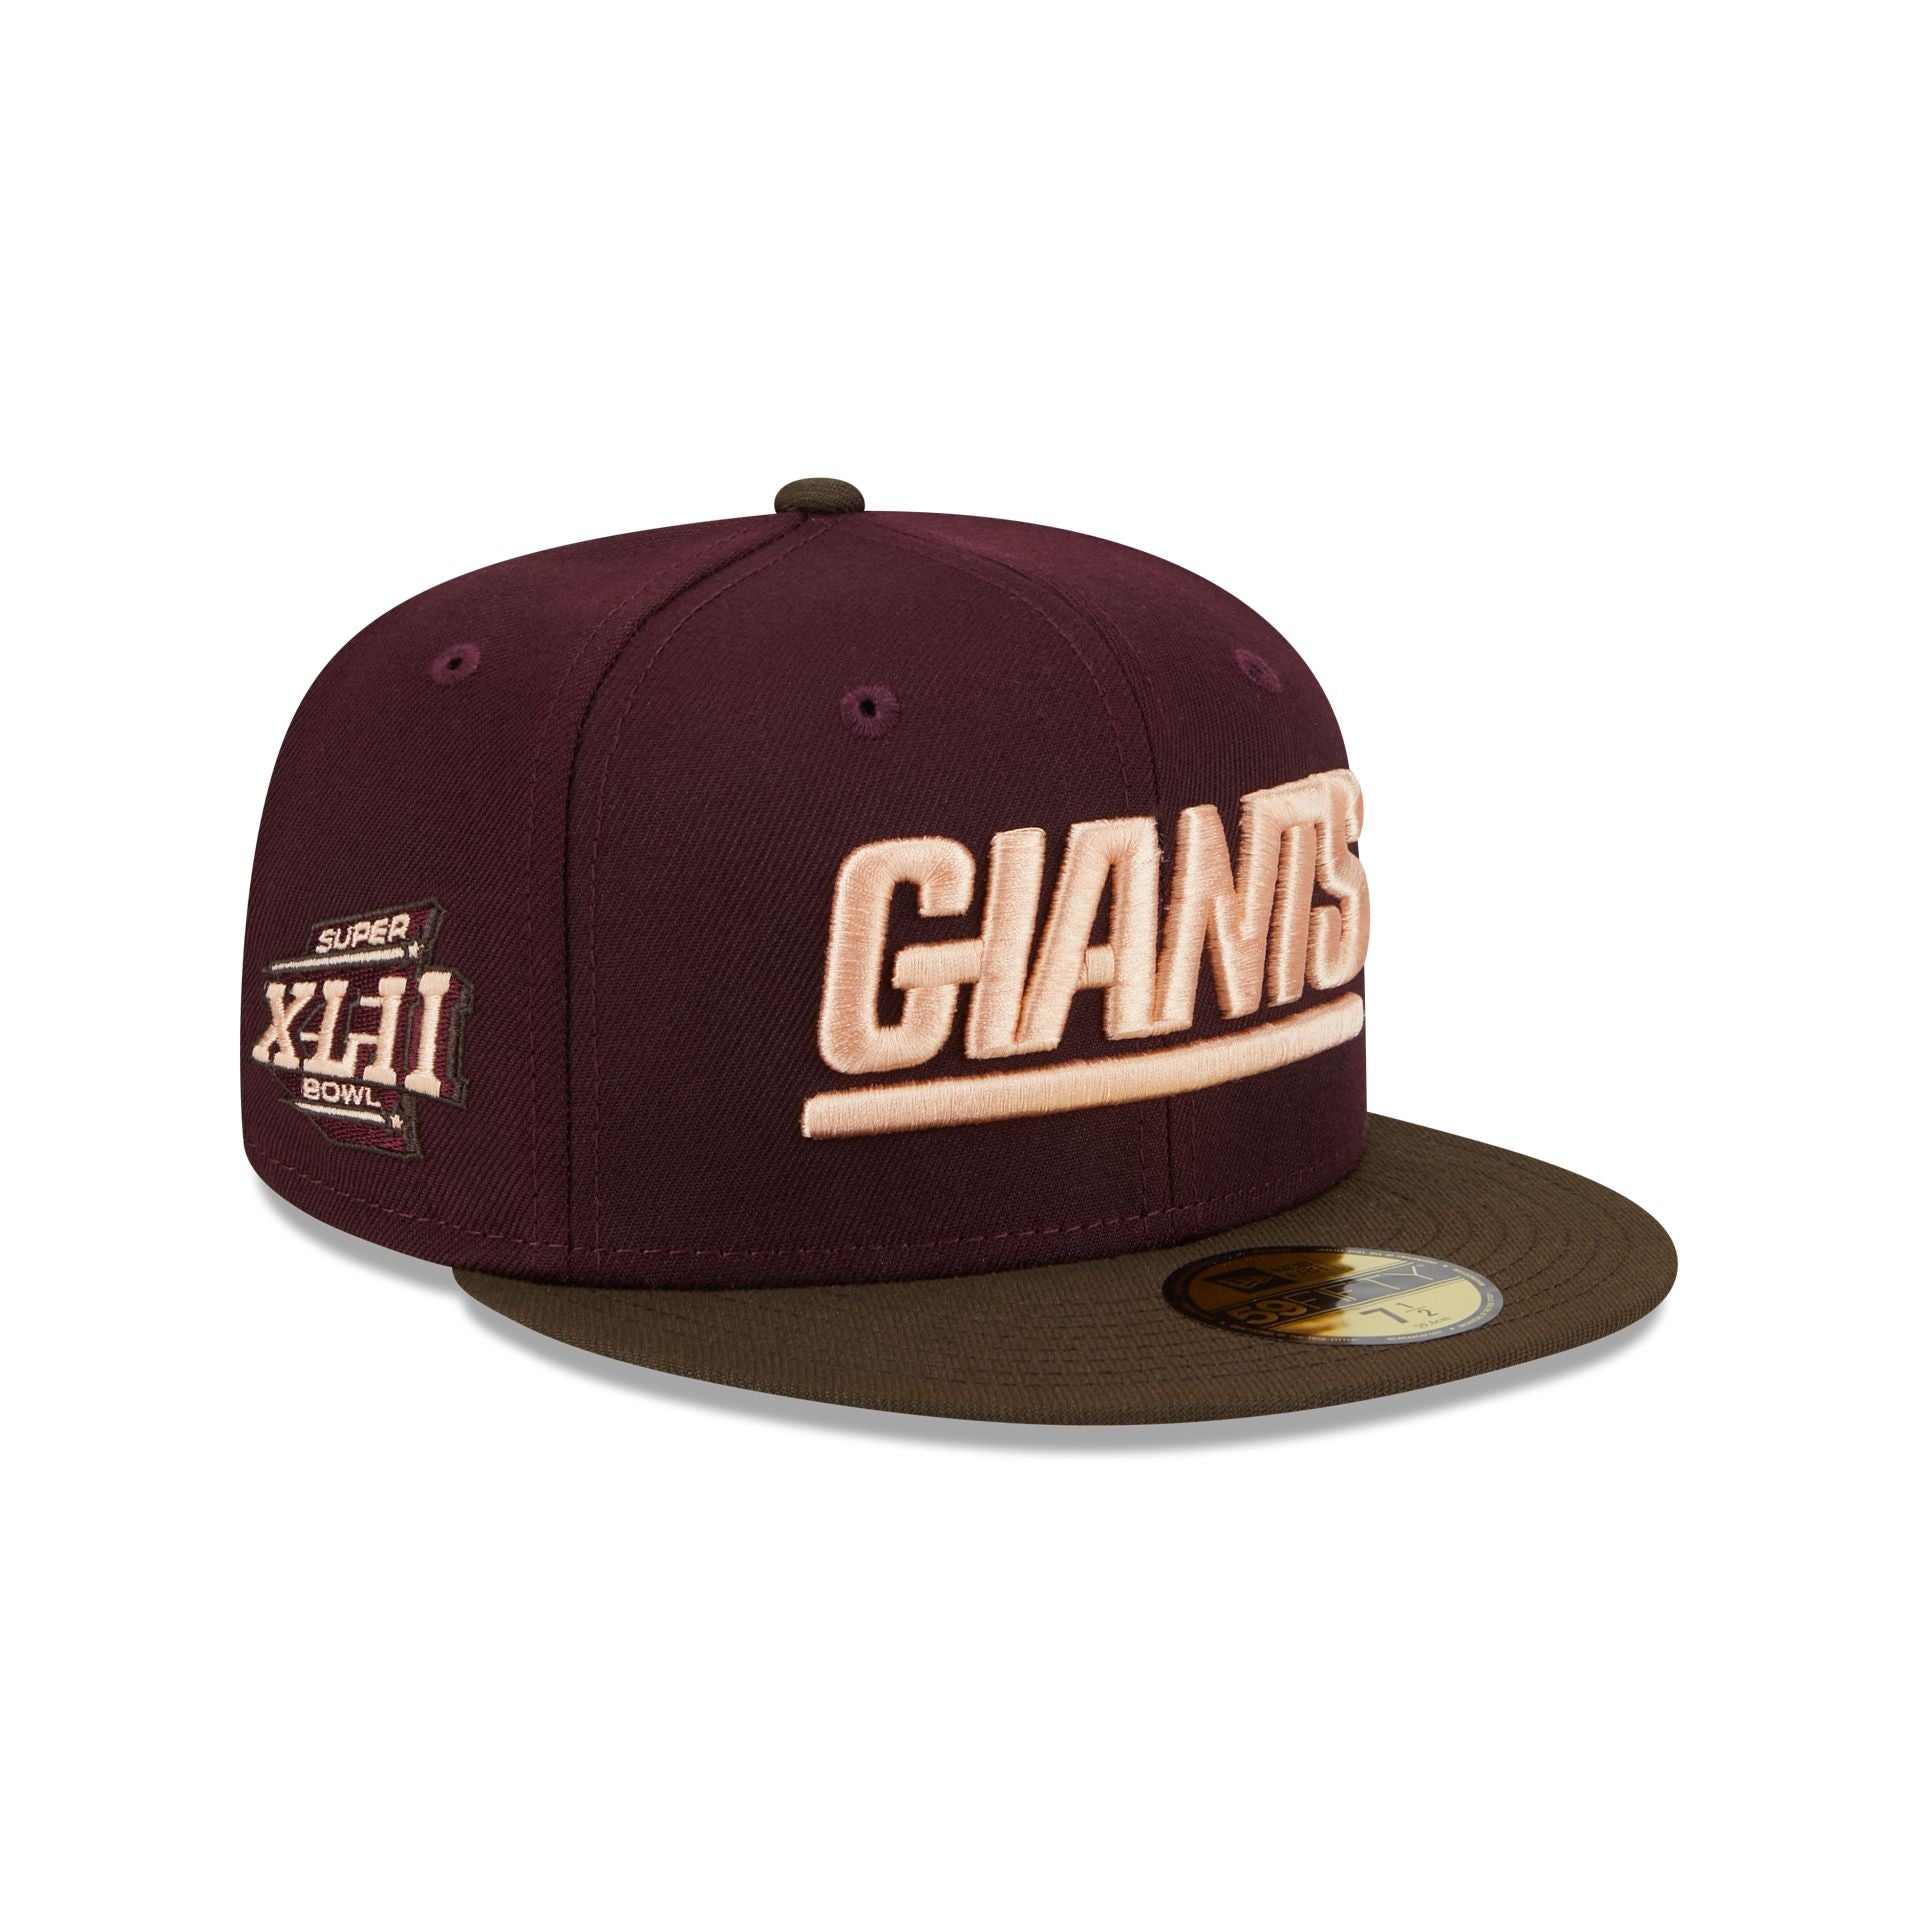 New York Giants Size 7 3/4 fitted New Era cap